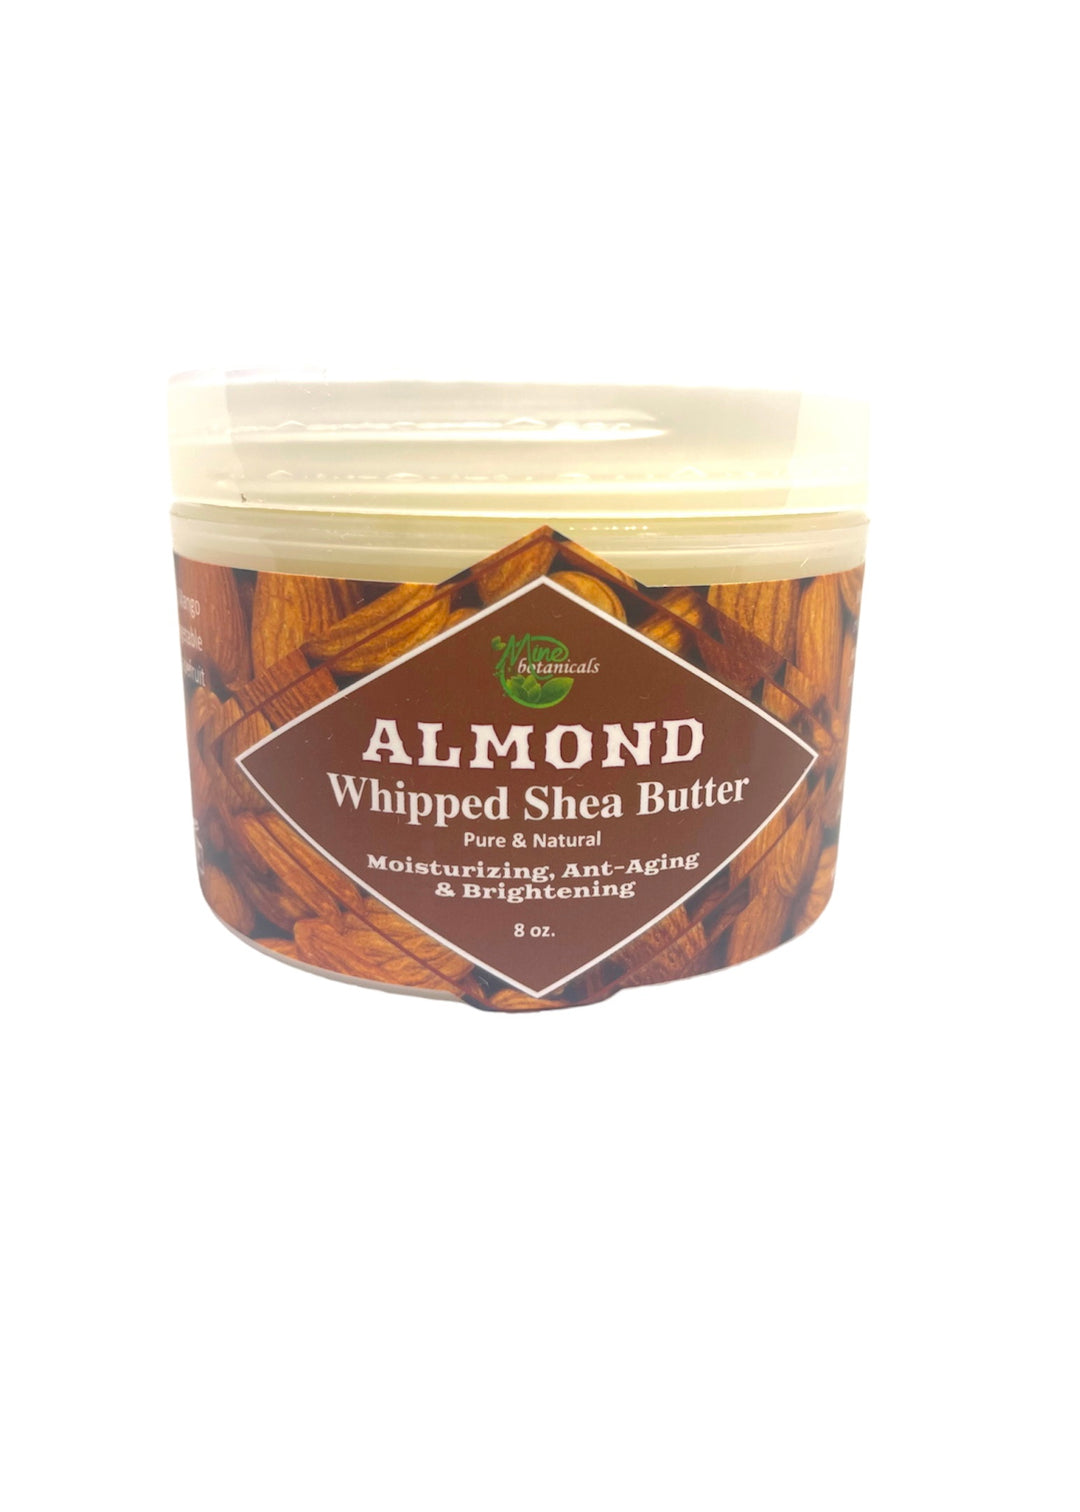 ALMOND WHIPPED SHEA BUTTER